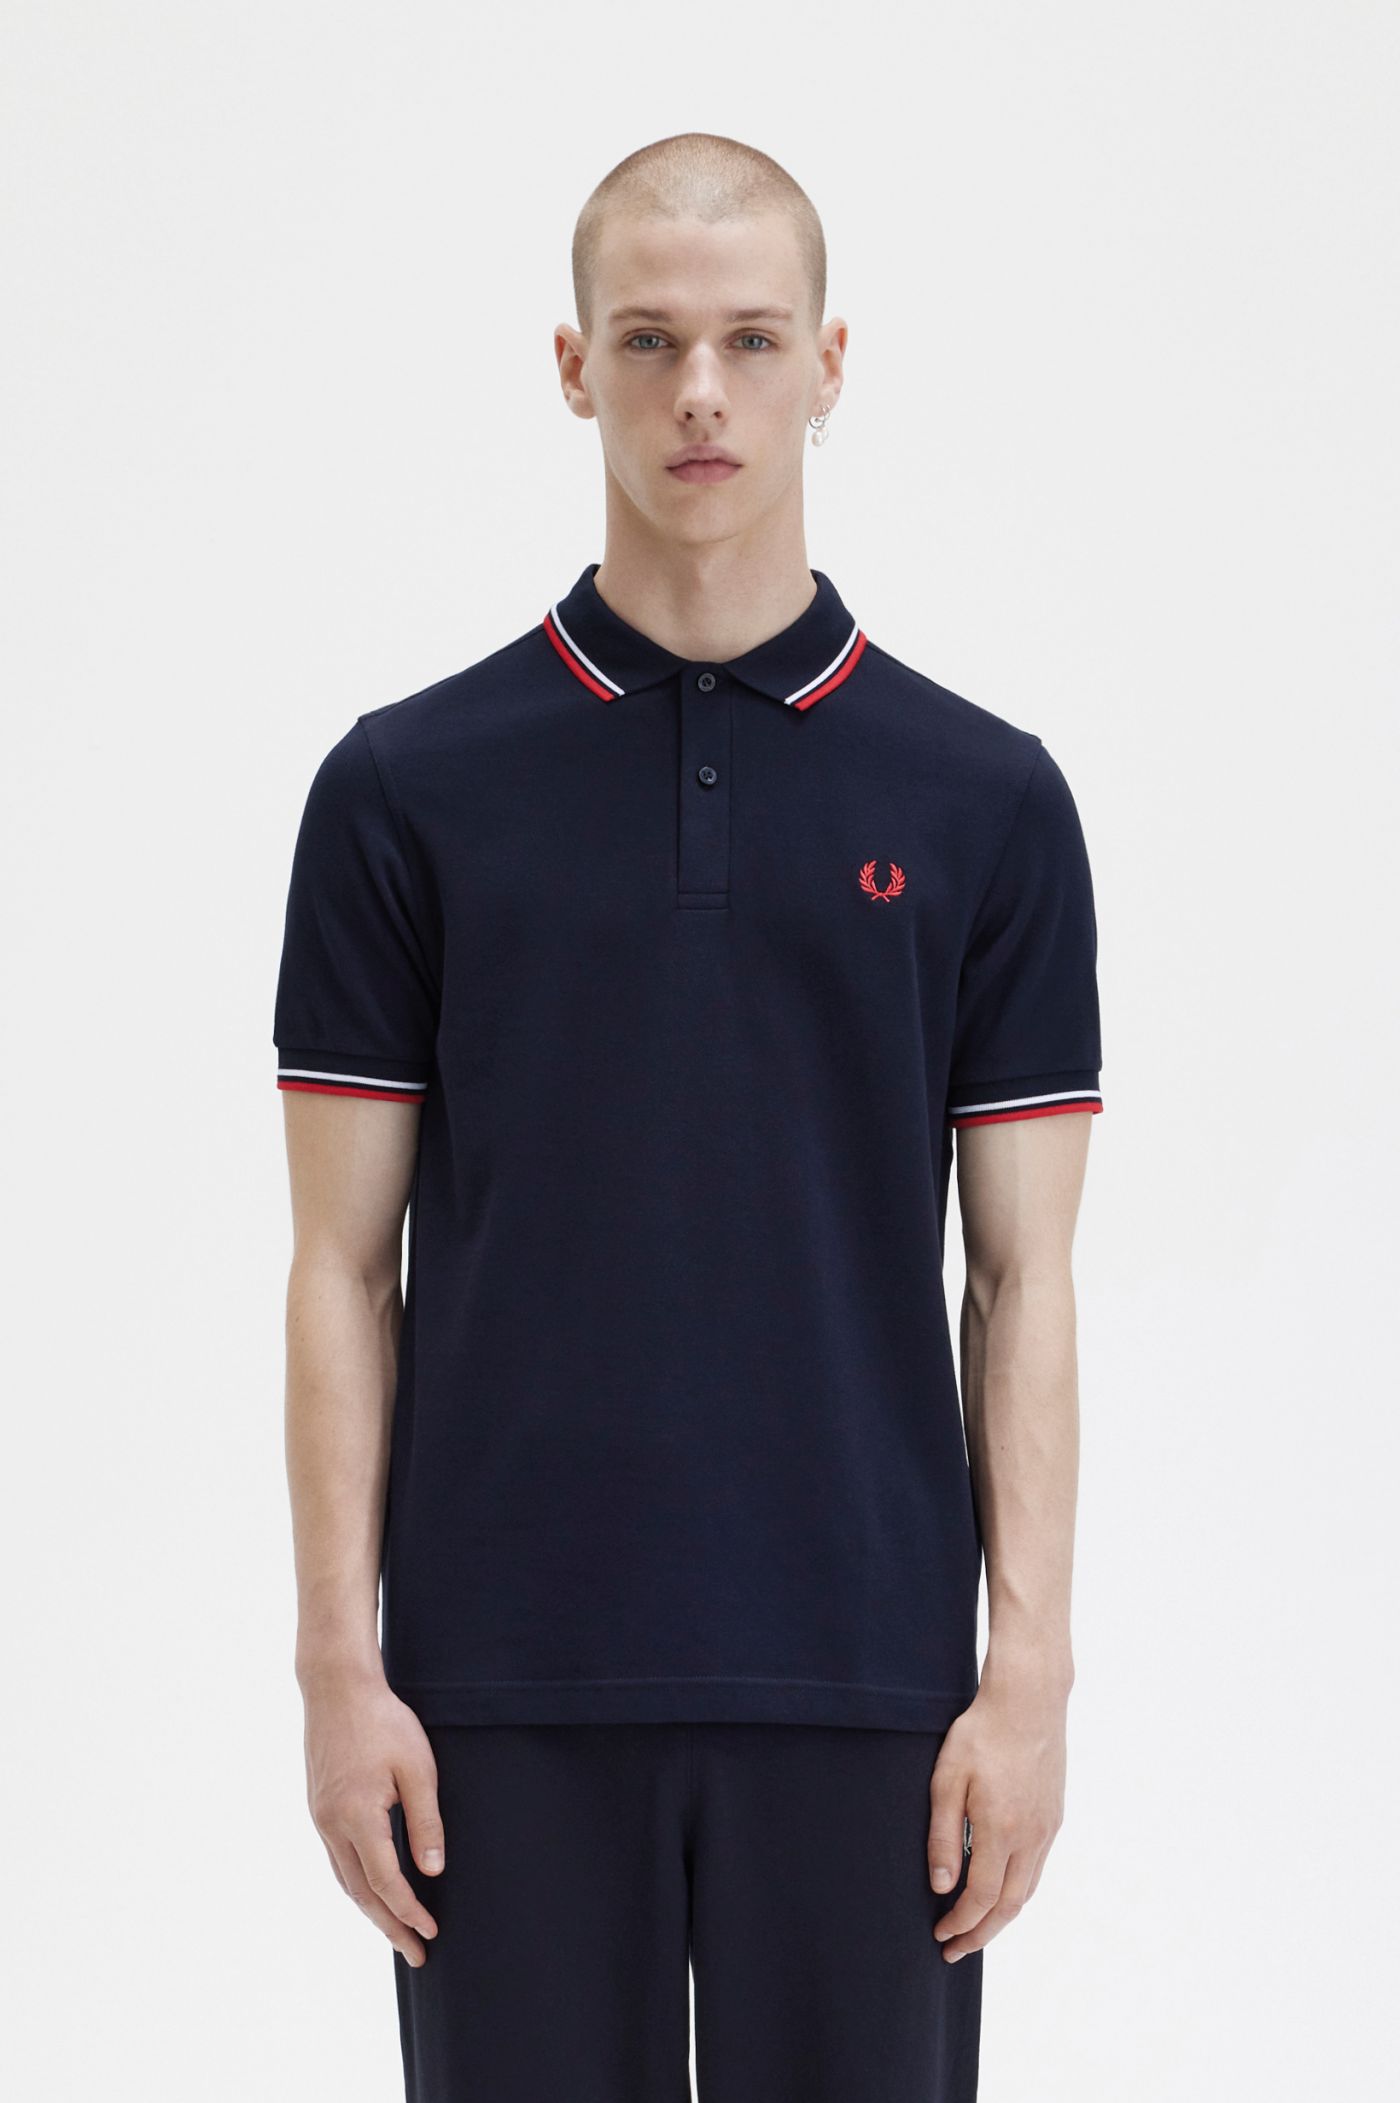 M3600 Navy White Red The Fred Perry Shirt Men S Short And Long